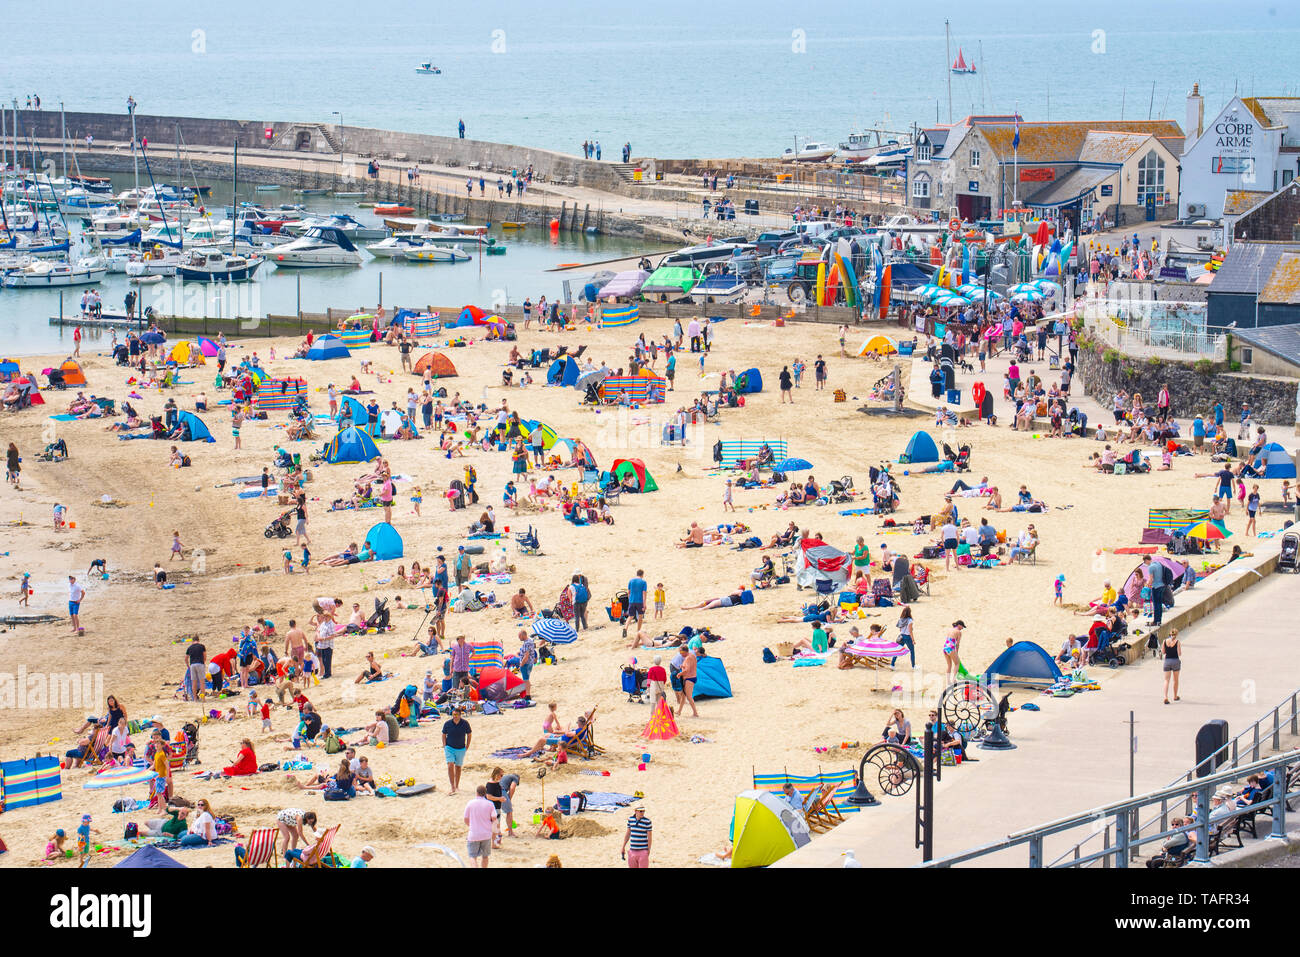 Lyme Regis, Dorset, UK. 25th May 2019. UK Weather: Crowds of holidaymakers and visitors flock to the beach at Lyme Regis to  bask in hot sunshine as the coastal resort sizzles on the hottest day of the year so far. Saturday is set to be the sunniest day of the late May bank holiday weekend.  Credit: Celia McMahon/Alamy Live News. Credit: Celia McMahon/Alamy Live News Stock Photo